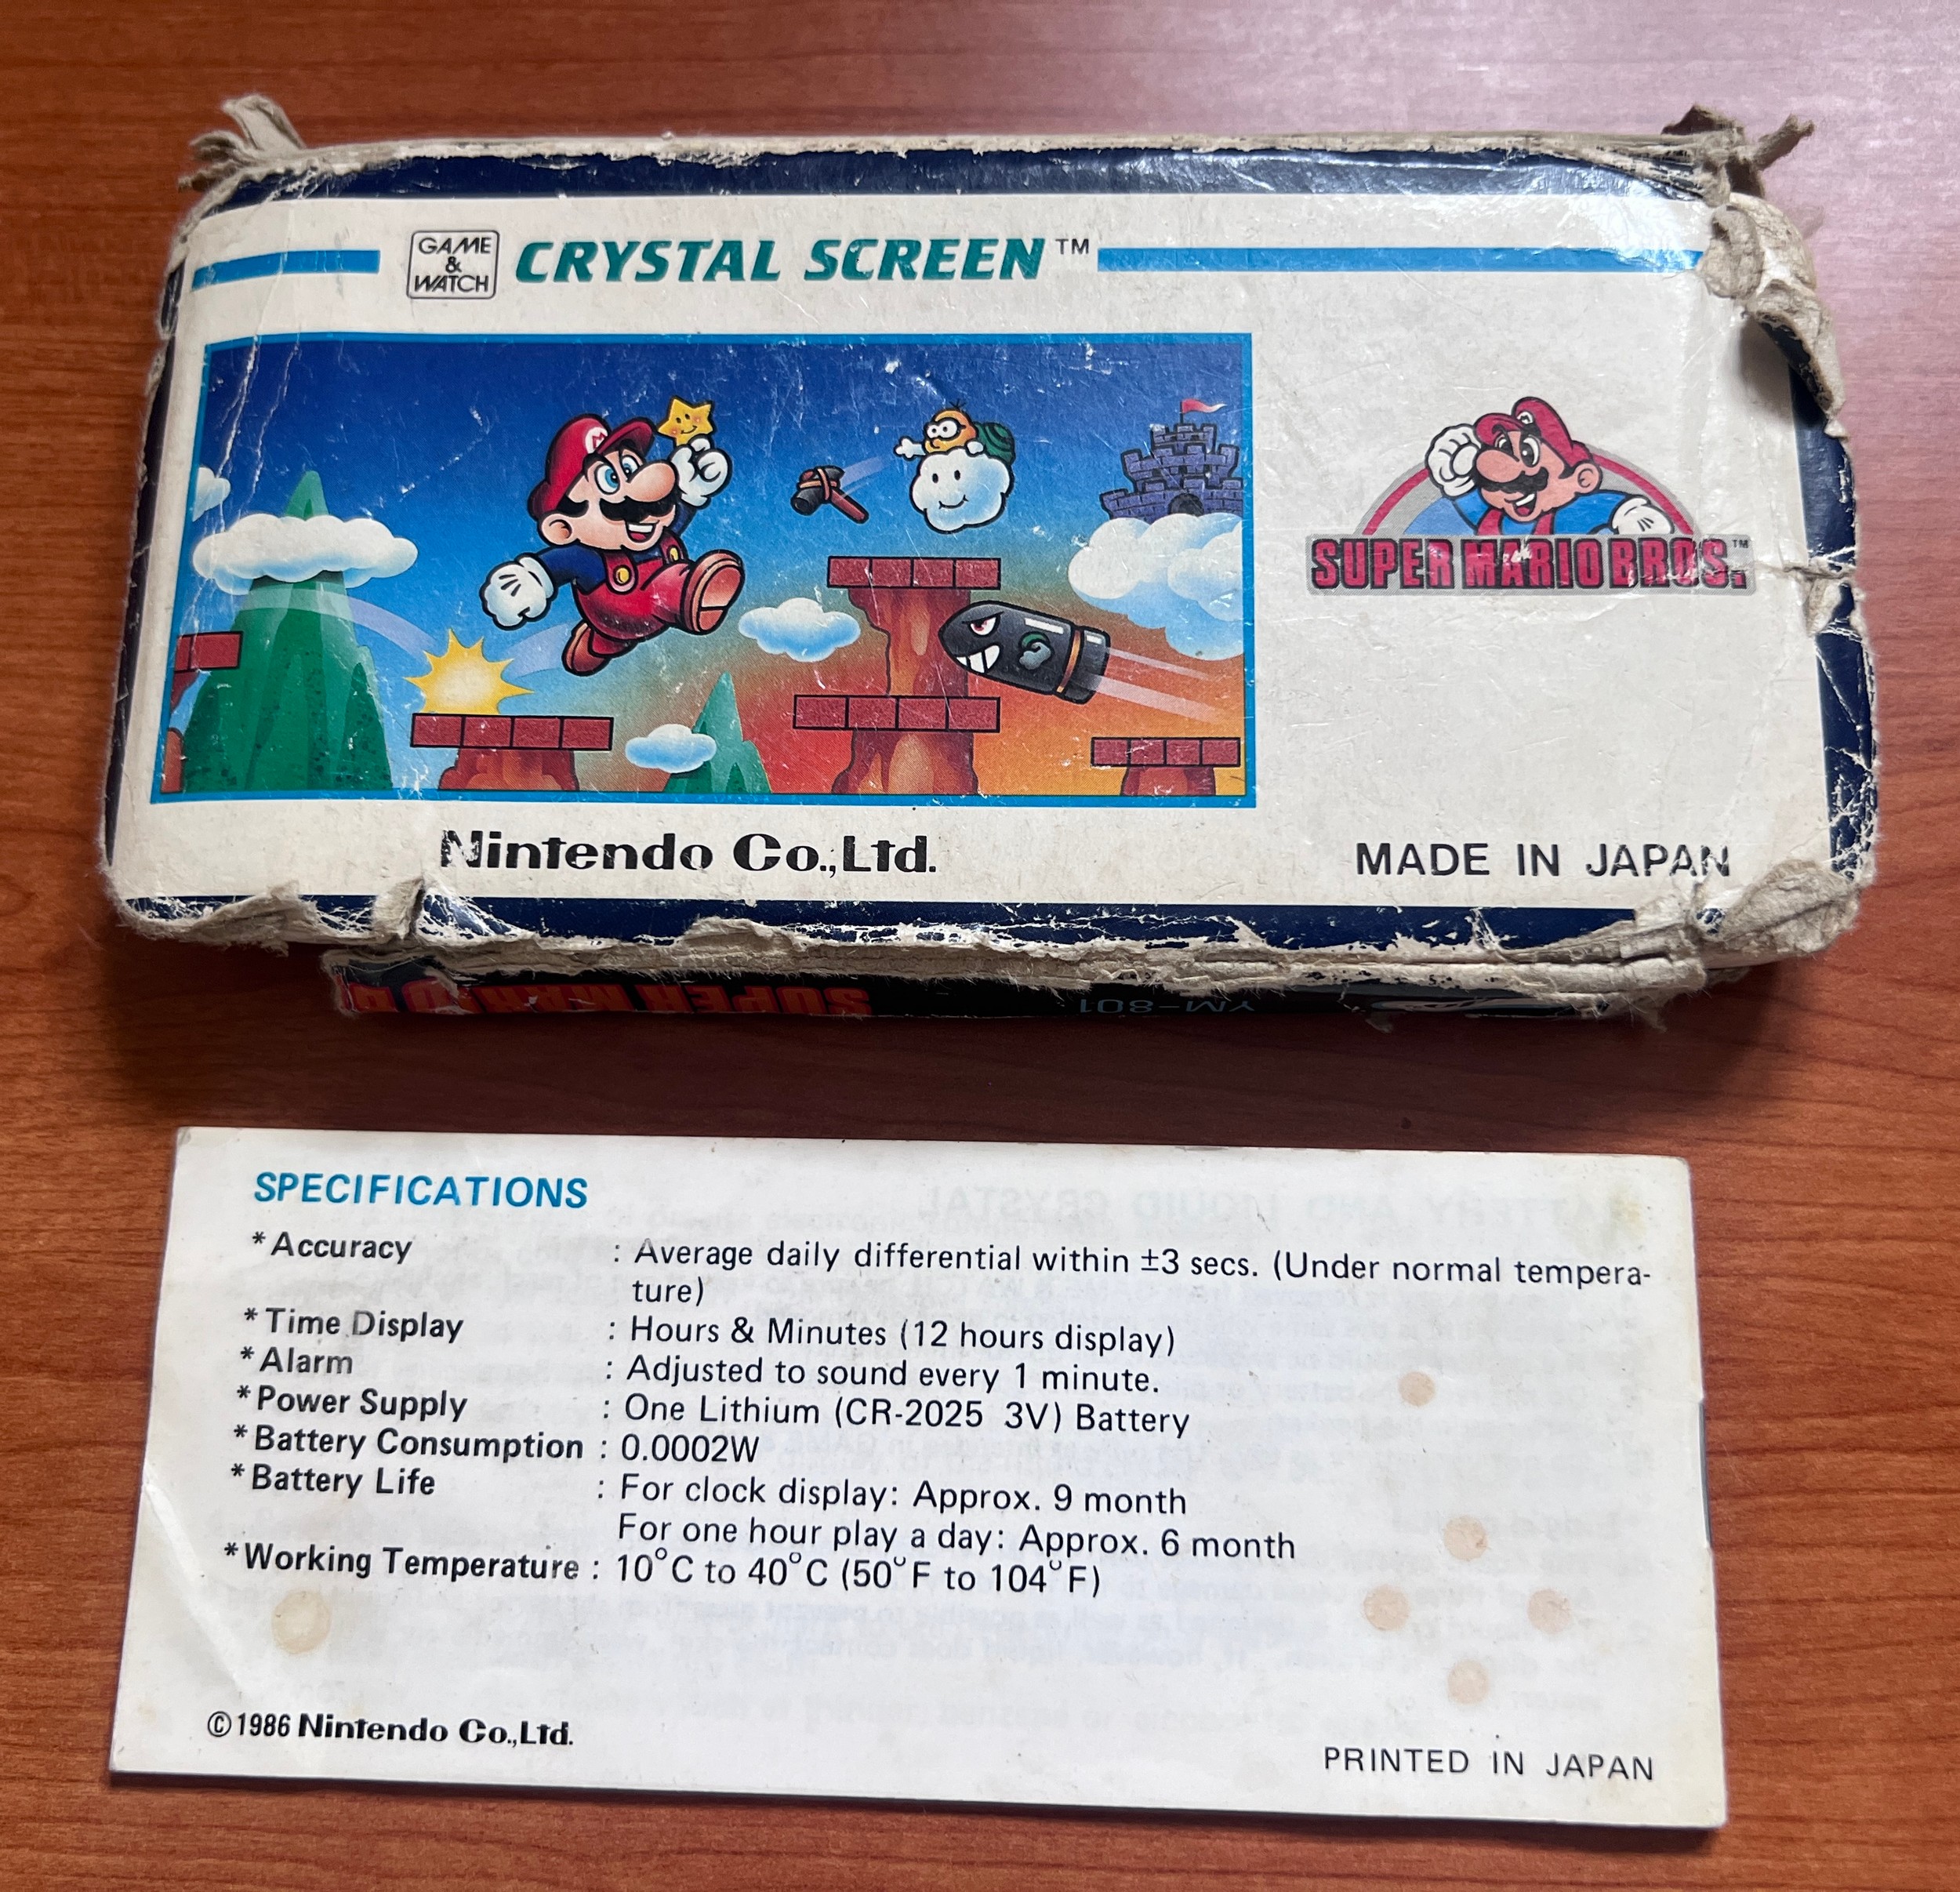 Nintendo Game & Watch YM-801 Super Mario Bros. Crystal Screen handheld console with original box and - Image 2 of 5